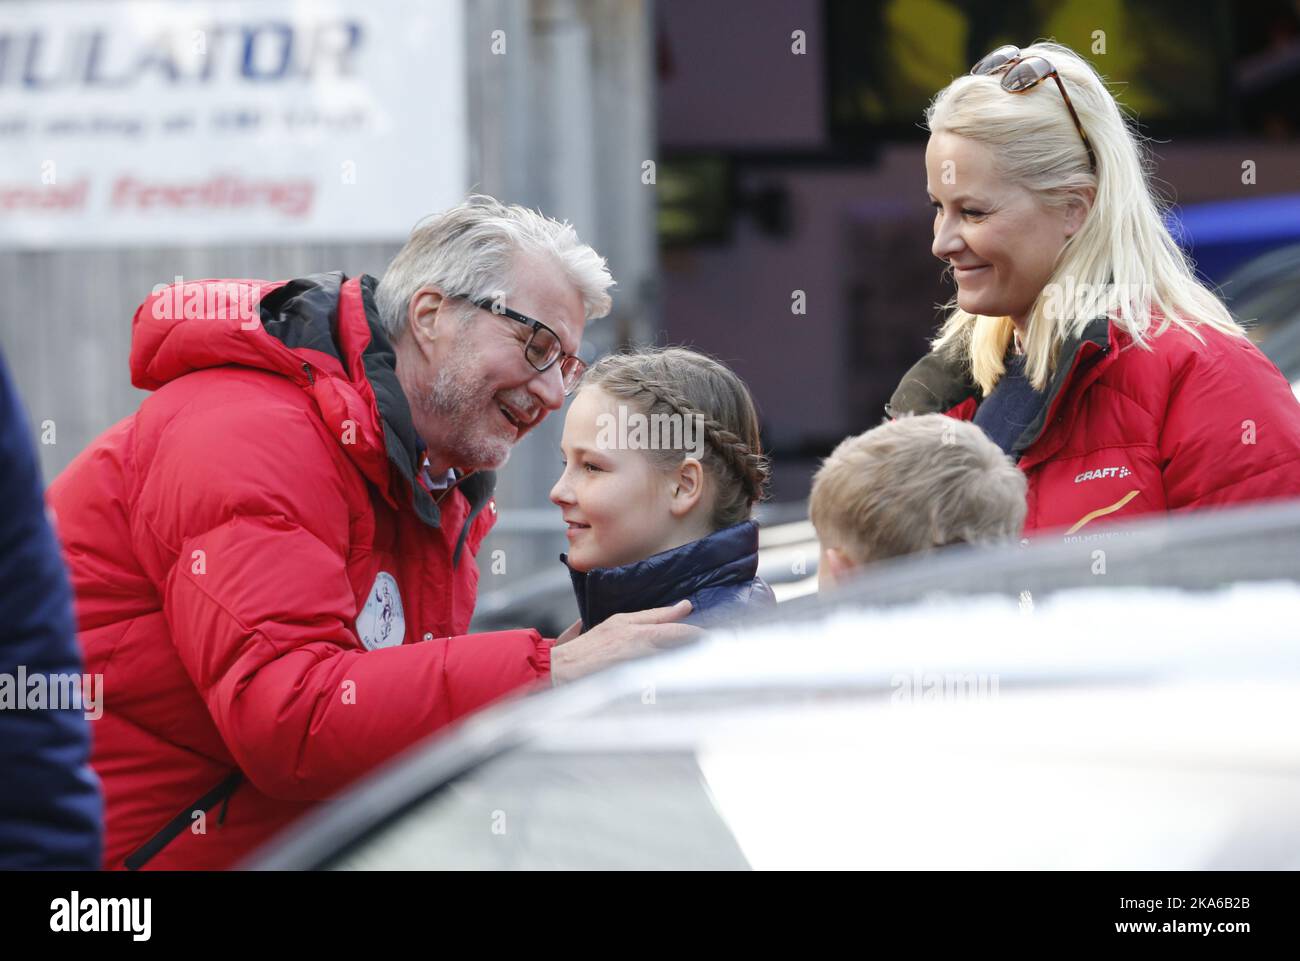 Oslo, Norway, 20150315 The Norwegian Royal Family were present in the Royal box at the Holmenkollen Ski Arena in Oslo Sunday March 15, 2015 for the last World Cup skijump competition of the season. Picture shows Crownprincess Mette-Marit and her children Prince Sverre Magnus and Princess Ingrid Alexandra being greeted on arrival by Oslo-mayor Fabian Stang. Photo: Terje Bendiksby / NTB scanpix  Stock Photo